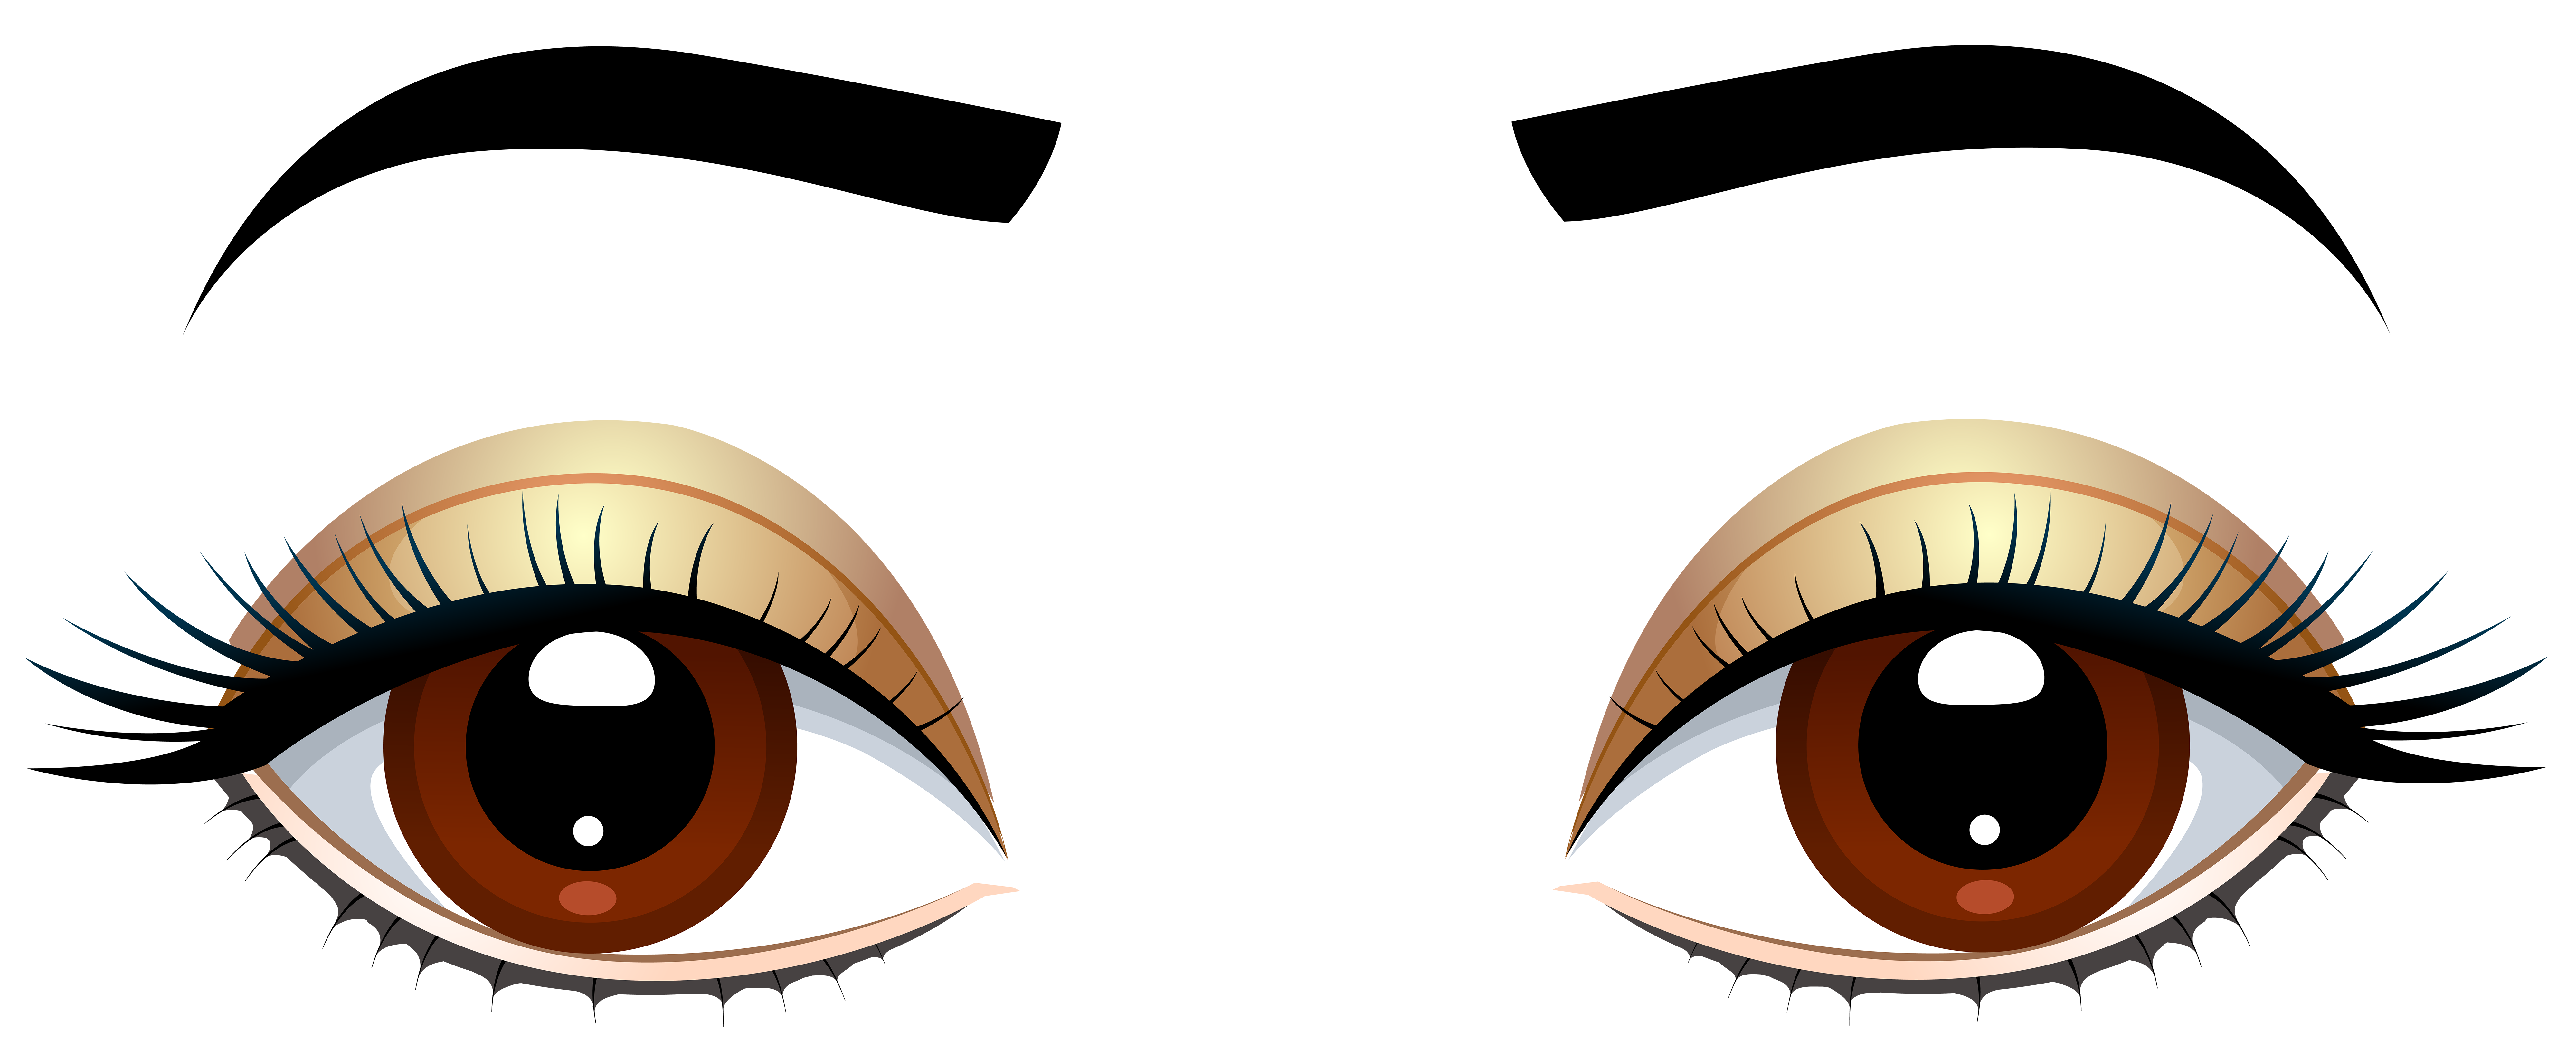 Brown Female Eyes PNG Clipart - Best WEB Clipart